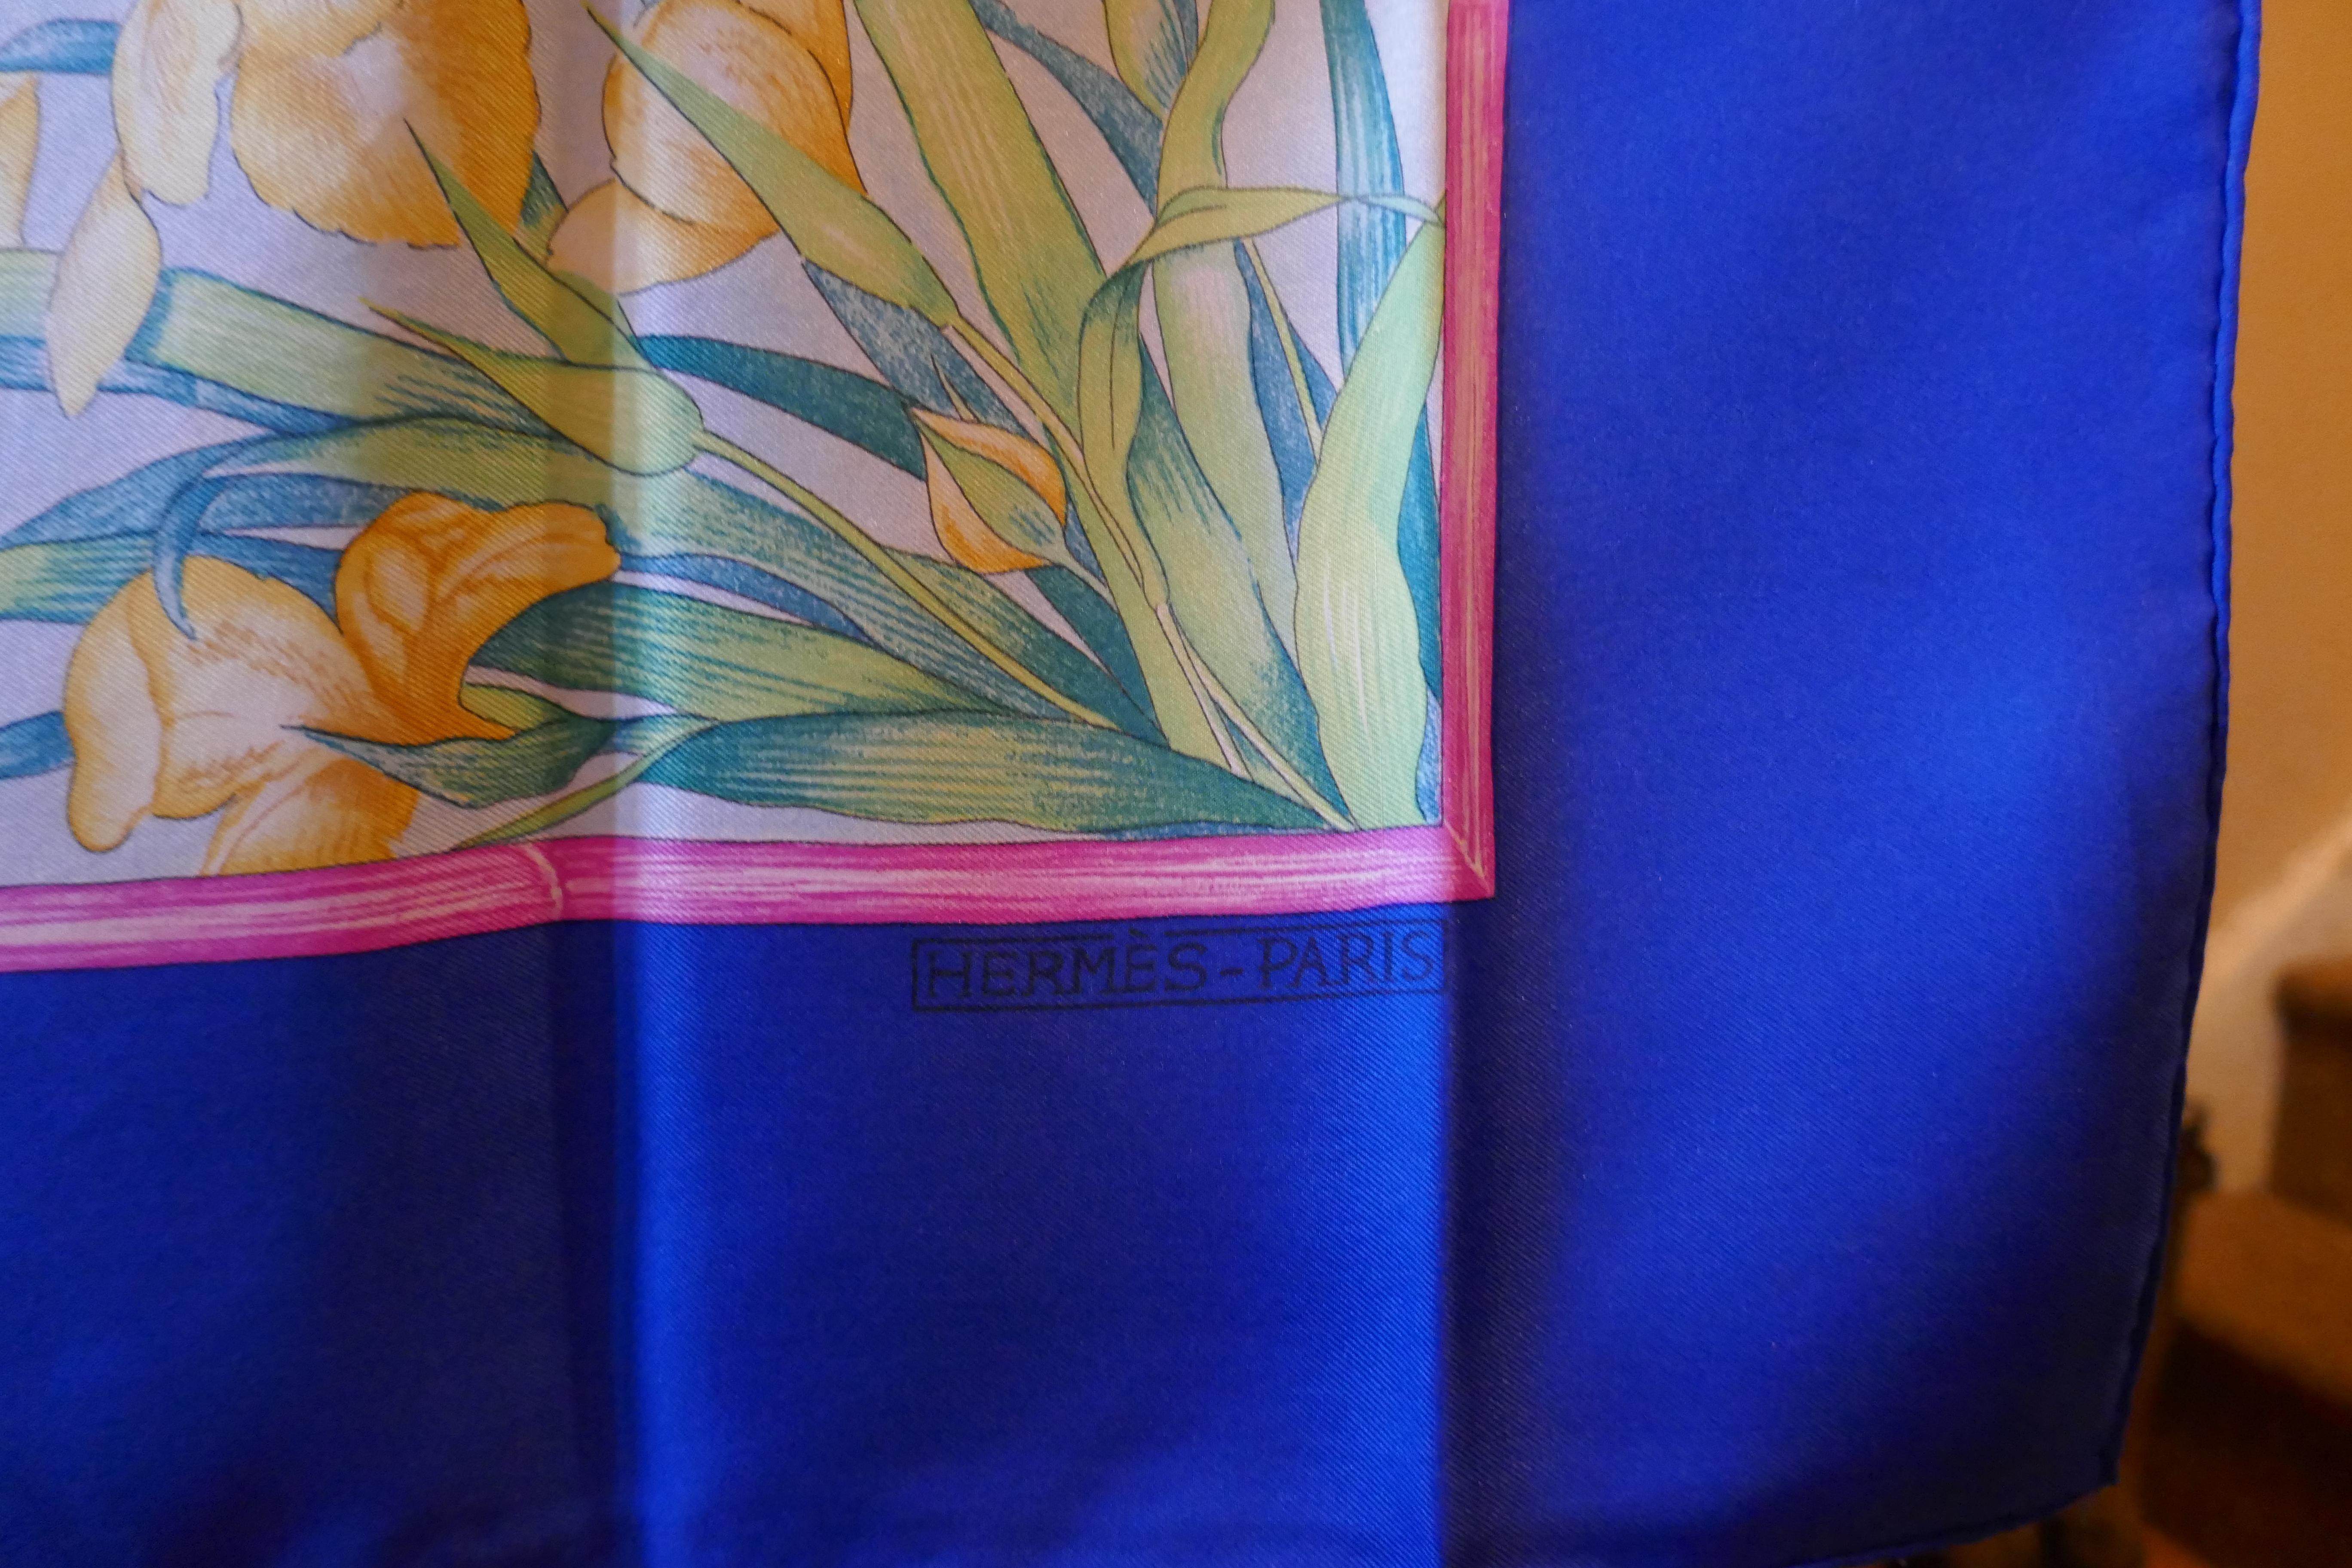 Original Rare 1989 Hermes Silk Scarf “ Giverny” by  Laurence Bourthoumieux In Good Condition For Sale In Chillerton, Isle of Wight